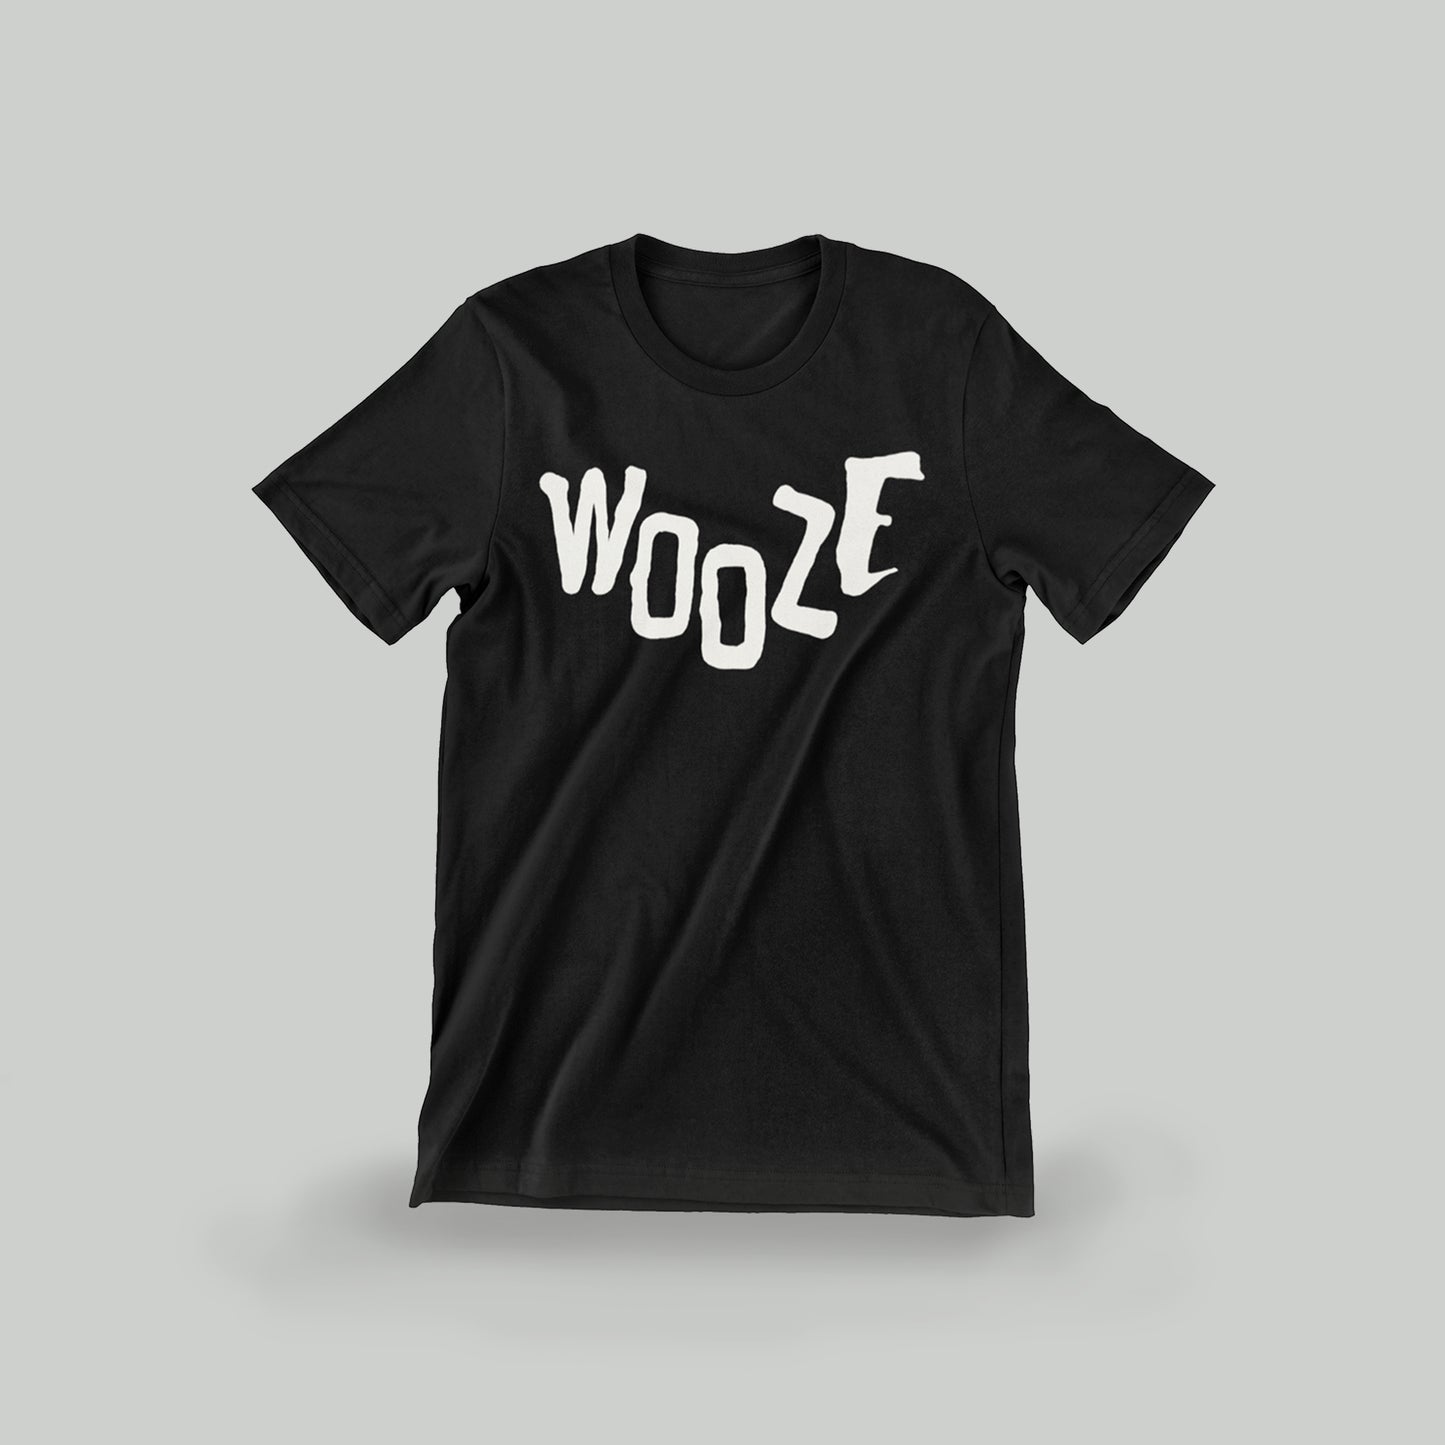 WOOZE - Magnificent Eleven - Limited Edition Tee